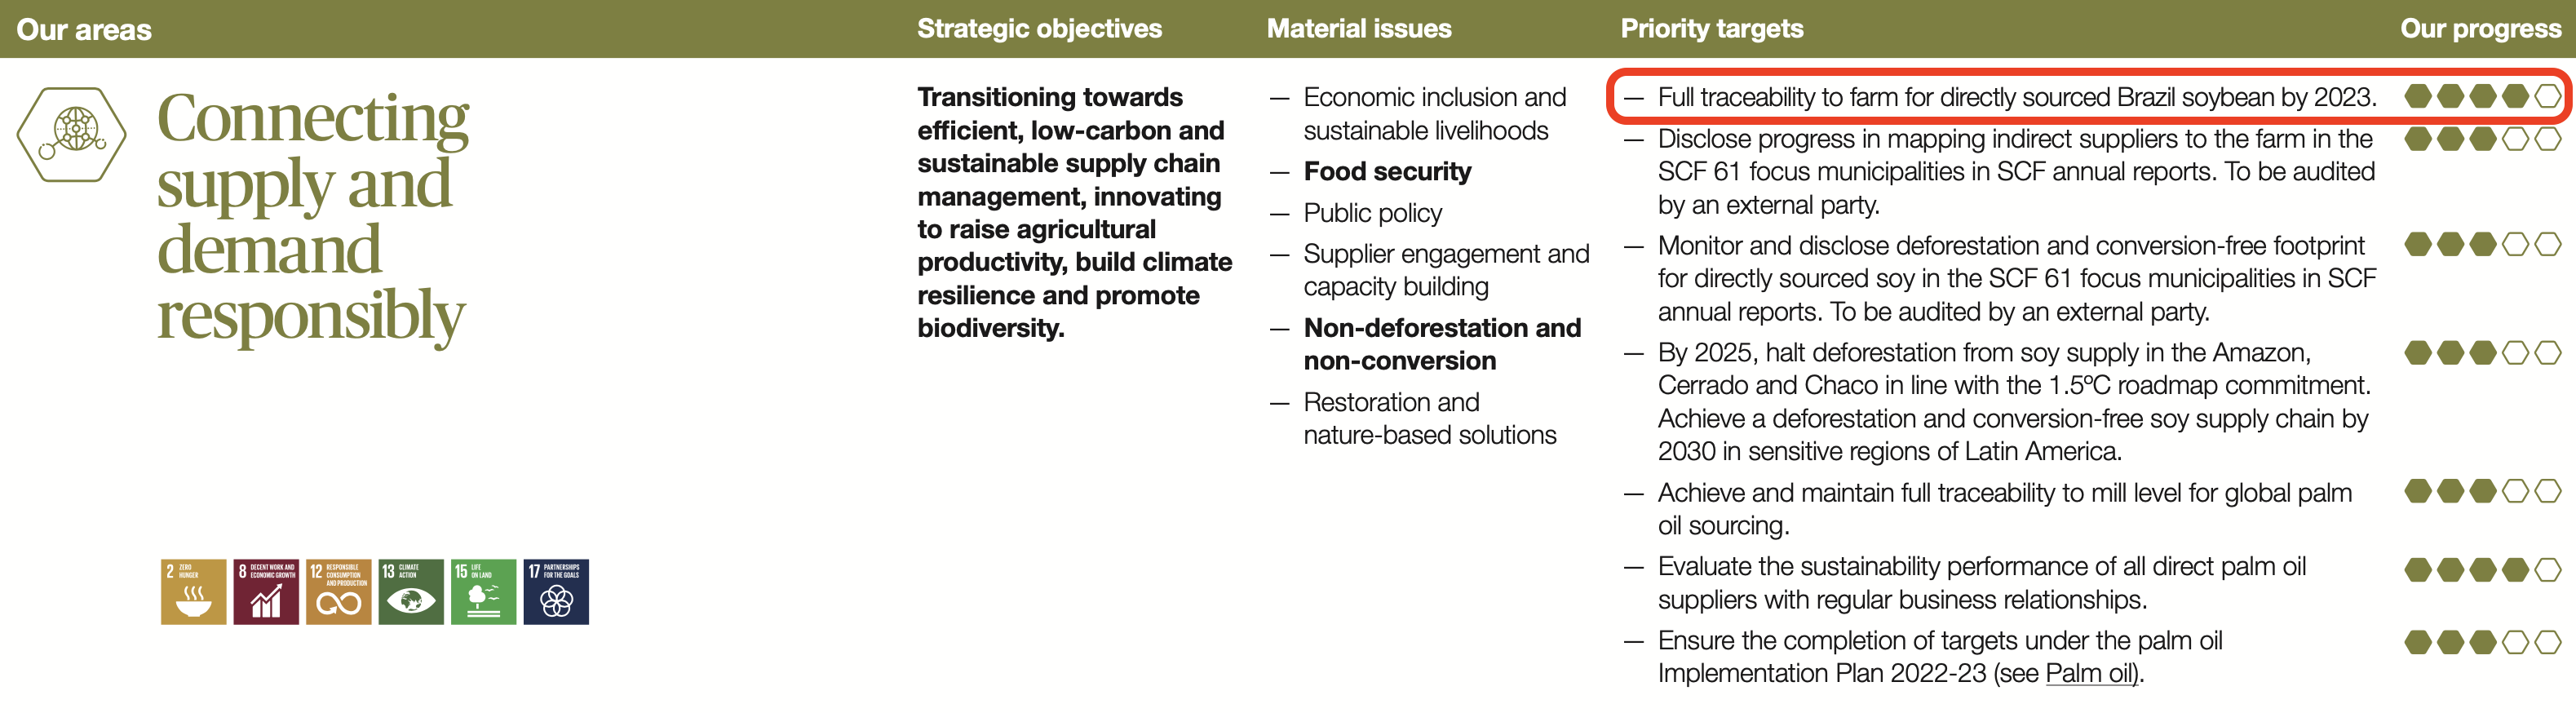 Screenshot of a COFCO sustainability report with a line of text circled in red in the top right corner